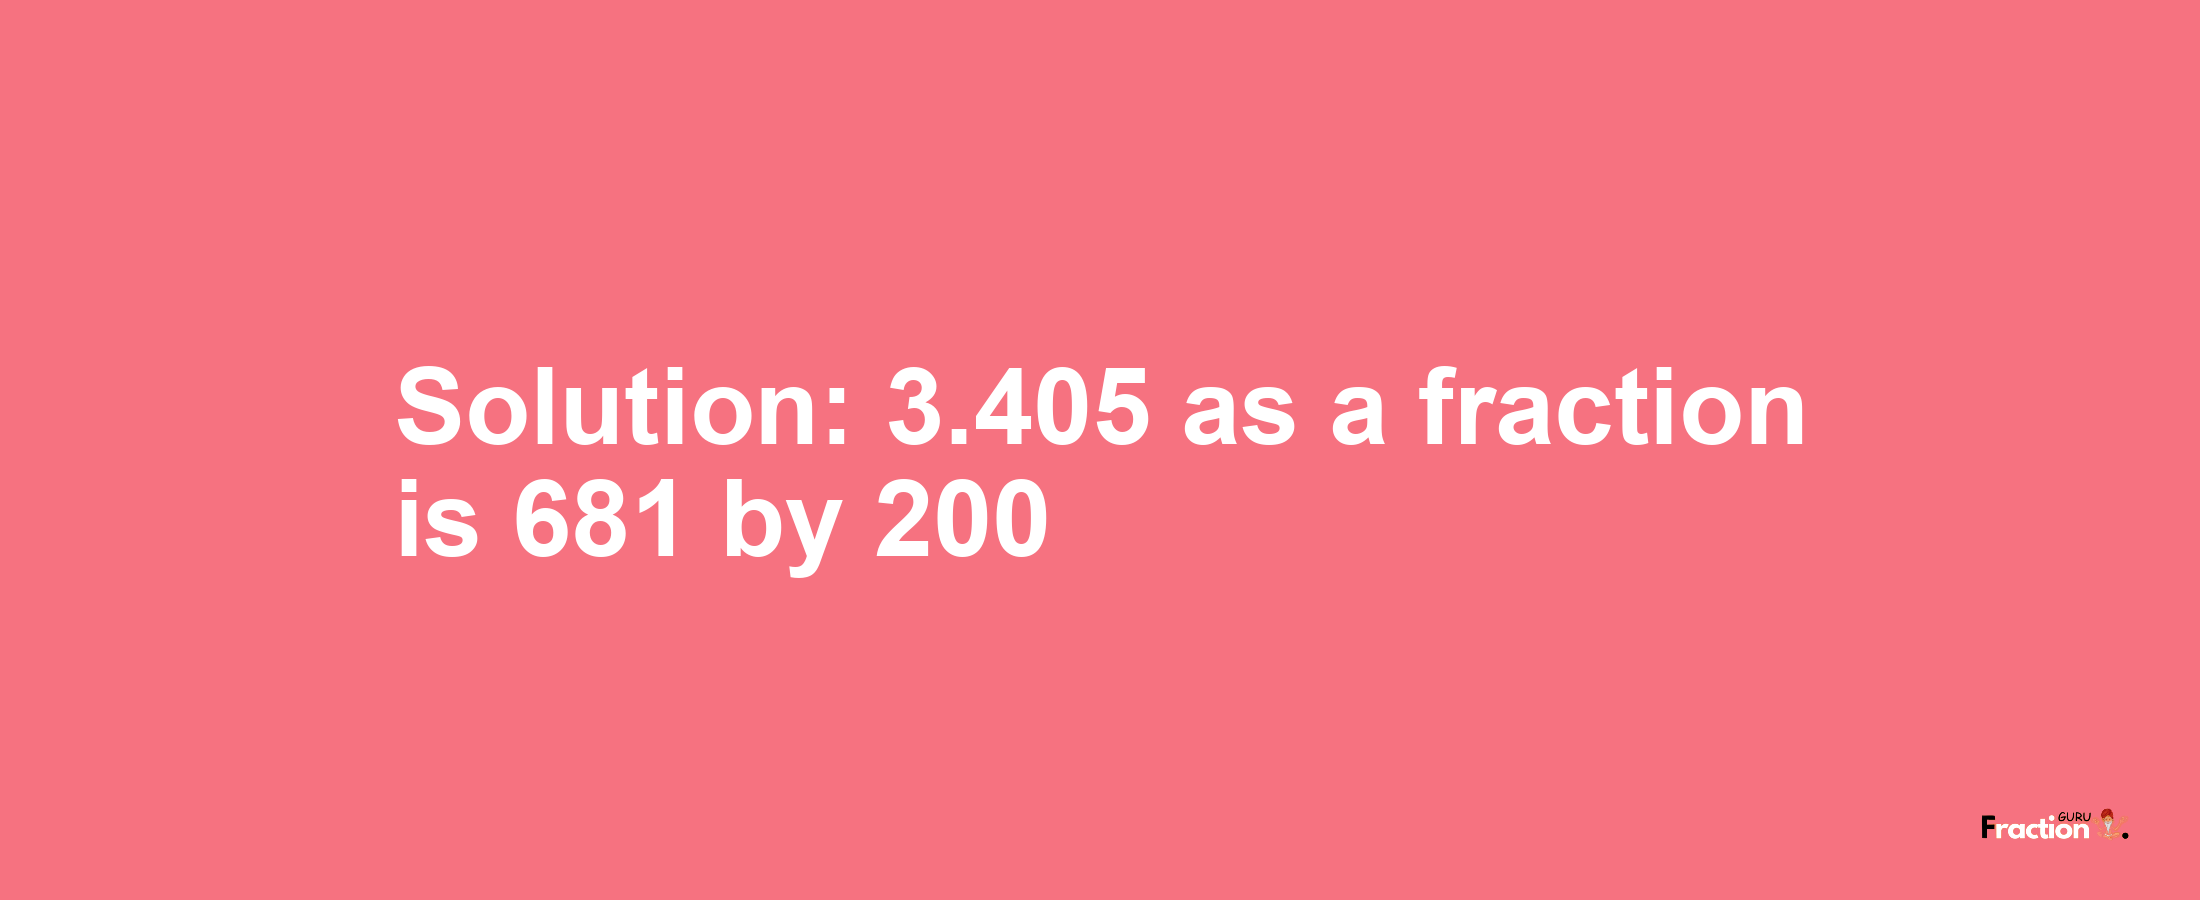 Solution:3.405 as a fraction is 681/200